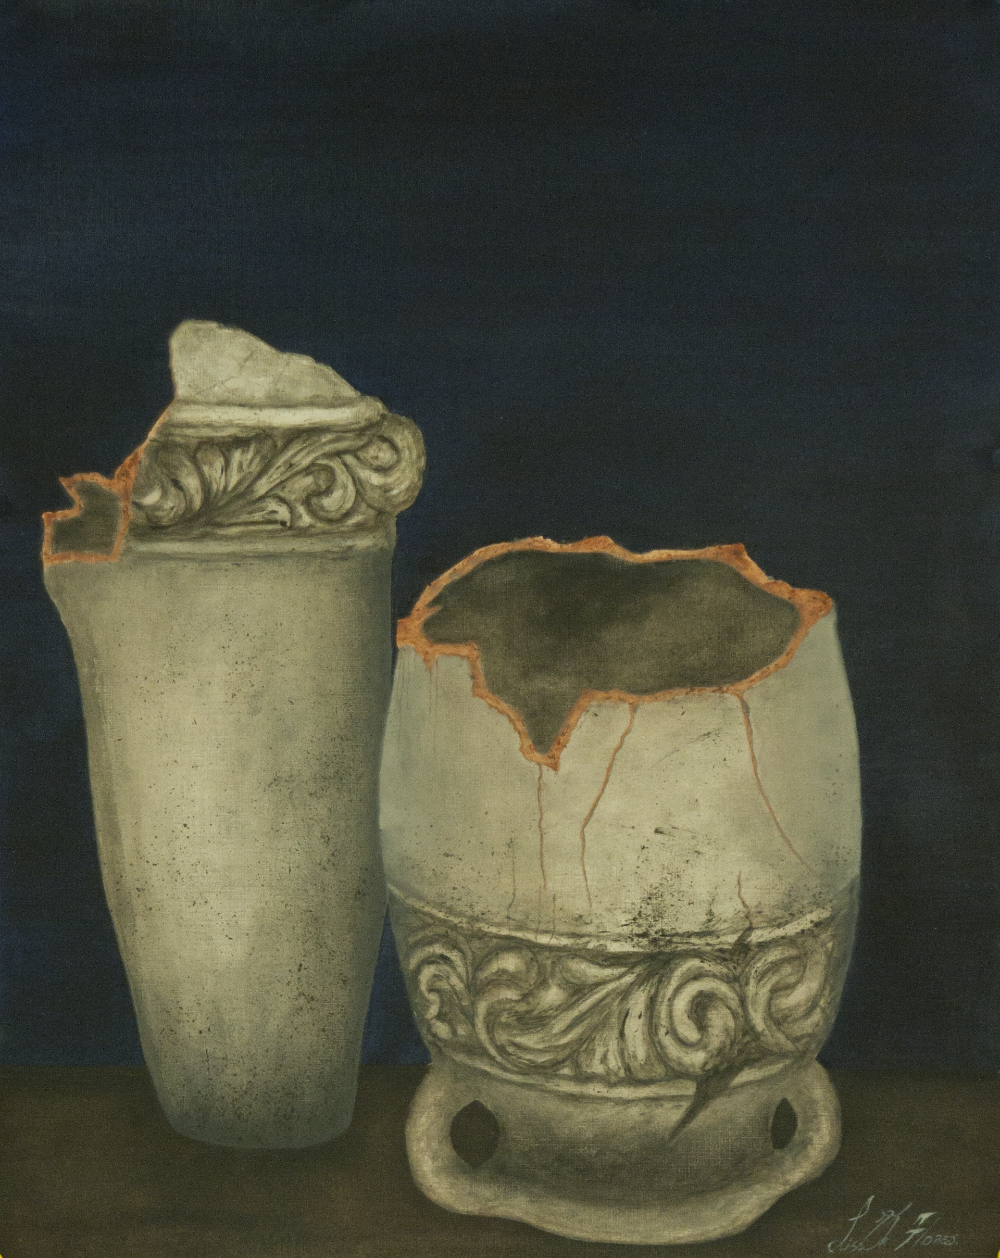 thumbnail of Still life by Liseth Flores. medium: oil on canvas paper. date: 2011. dimensions: 16 x 2 inches